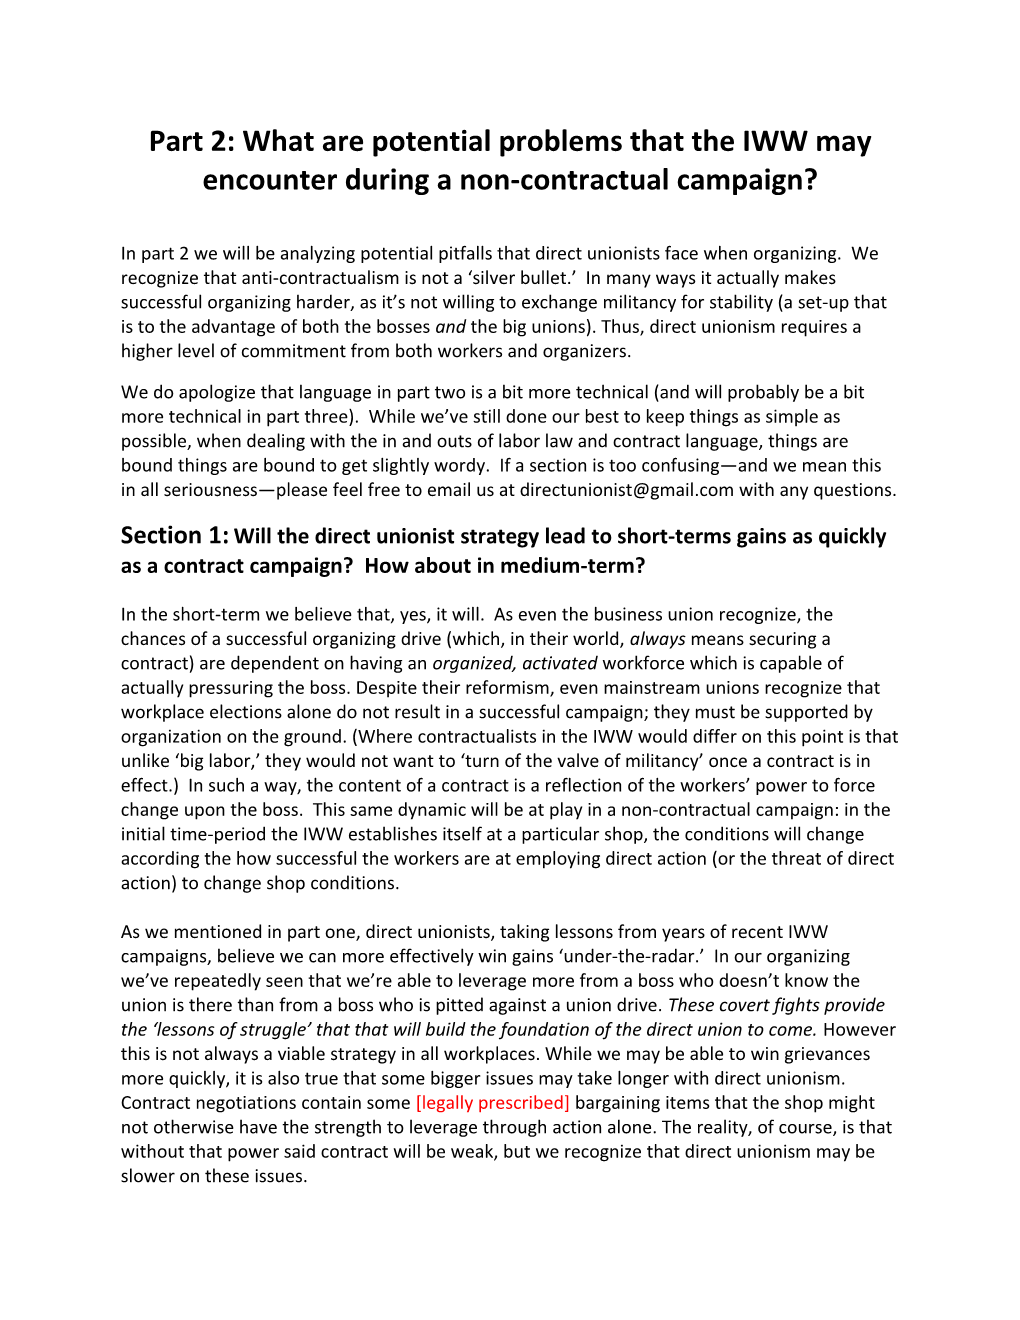 Part 2: What Are Potential Problems That the IWW May Encounter During a Non-Contractual Campaign